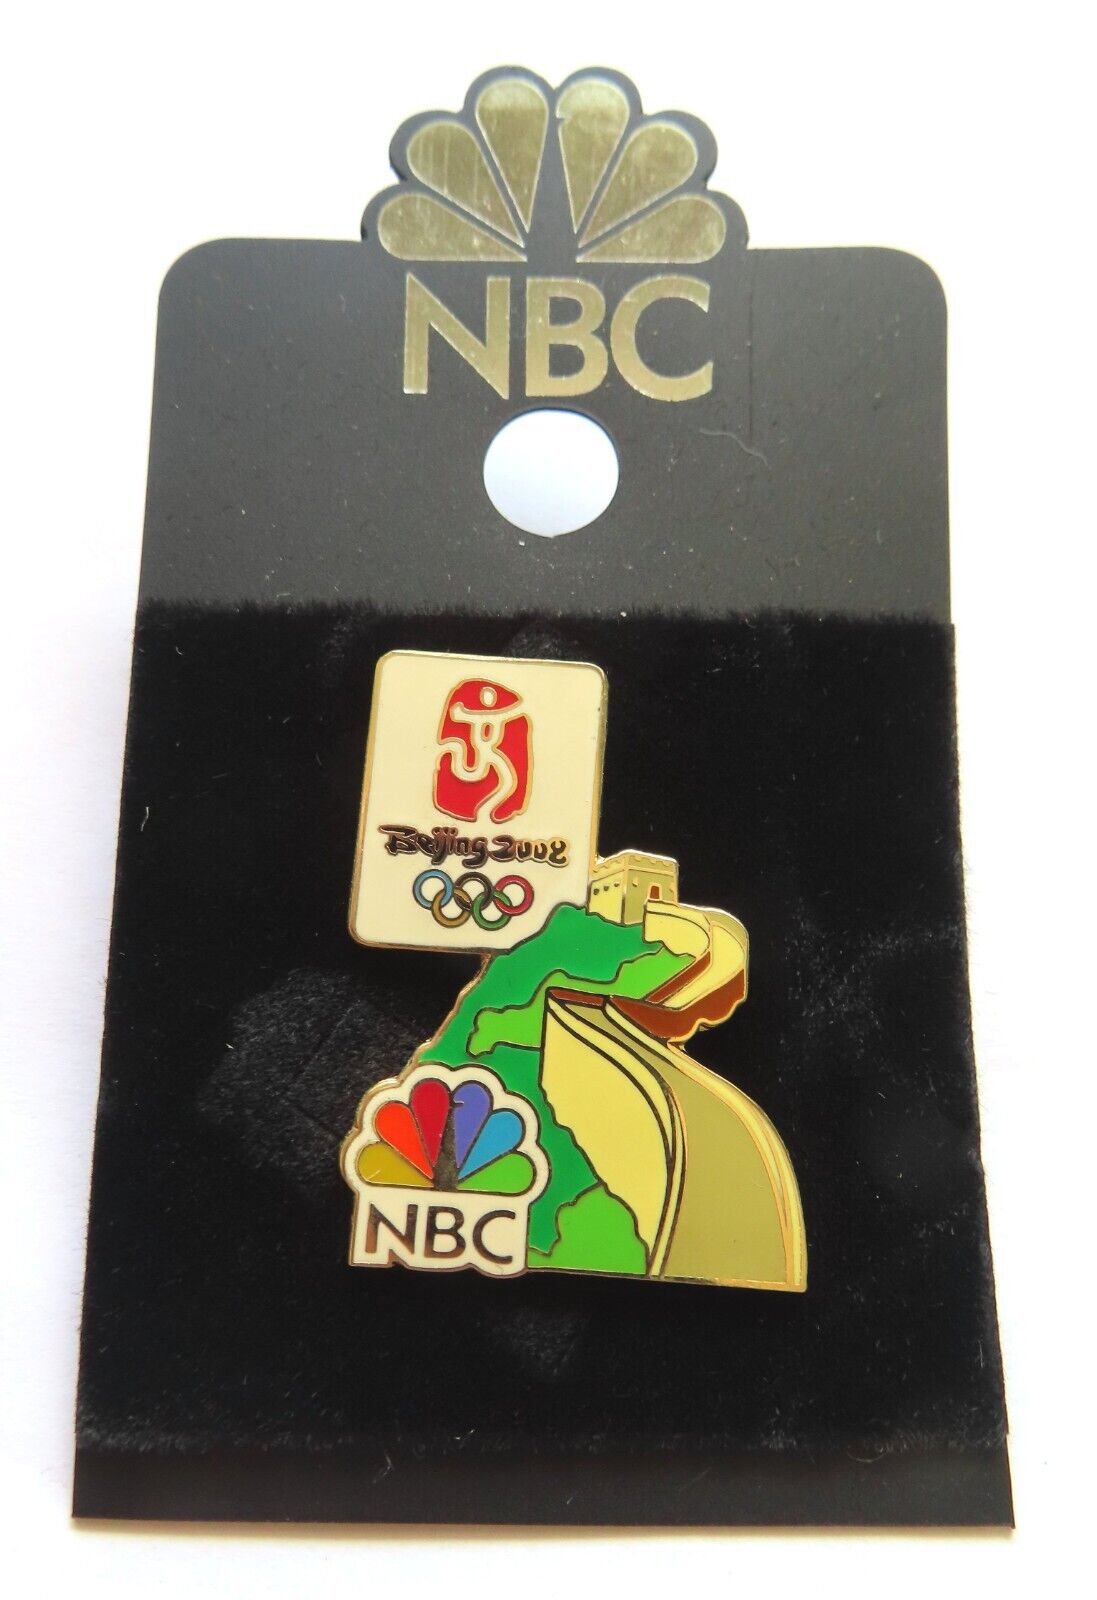 2008 Beijing Olympics pin: Great Wall of China with Olympic and NBC logos